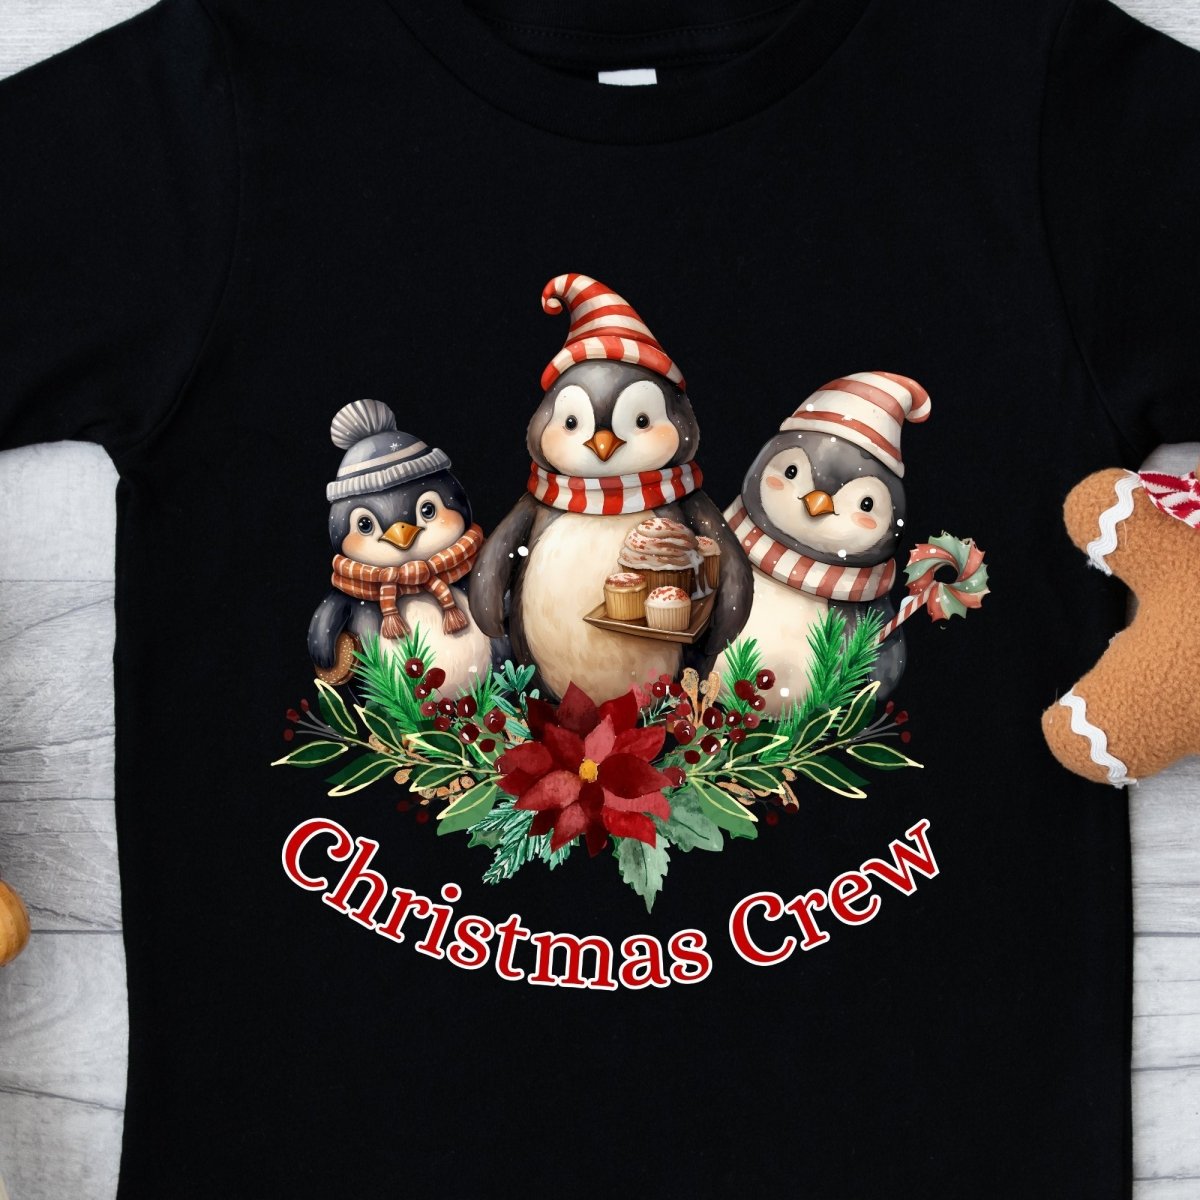 Penguin Christmas Crew T-Shirt - High Quality Festive Family Children T-Shirt, Family Reunion Tee, Holiday Shirt, Toddler Christmas Tee - Everything Pixel